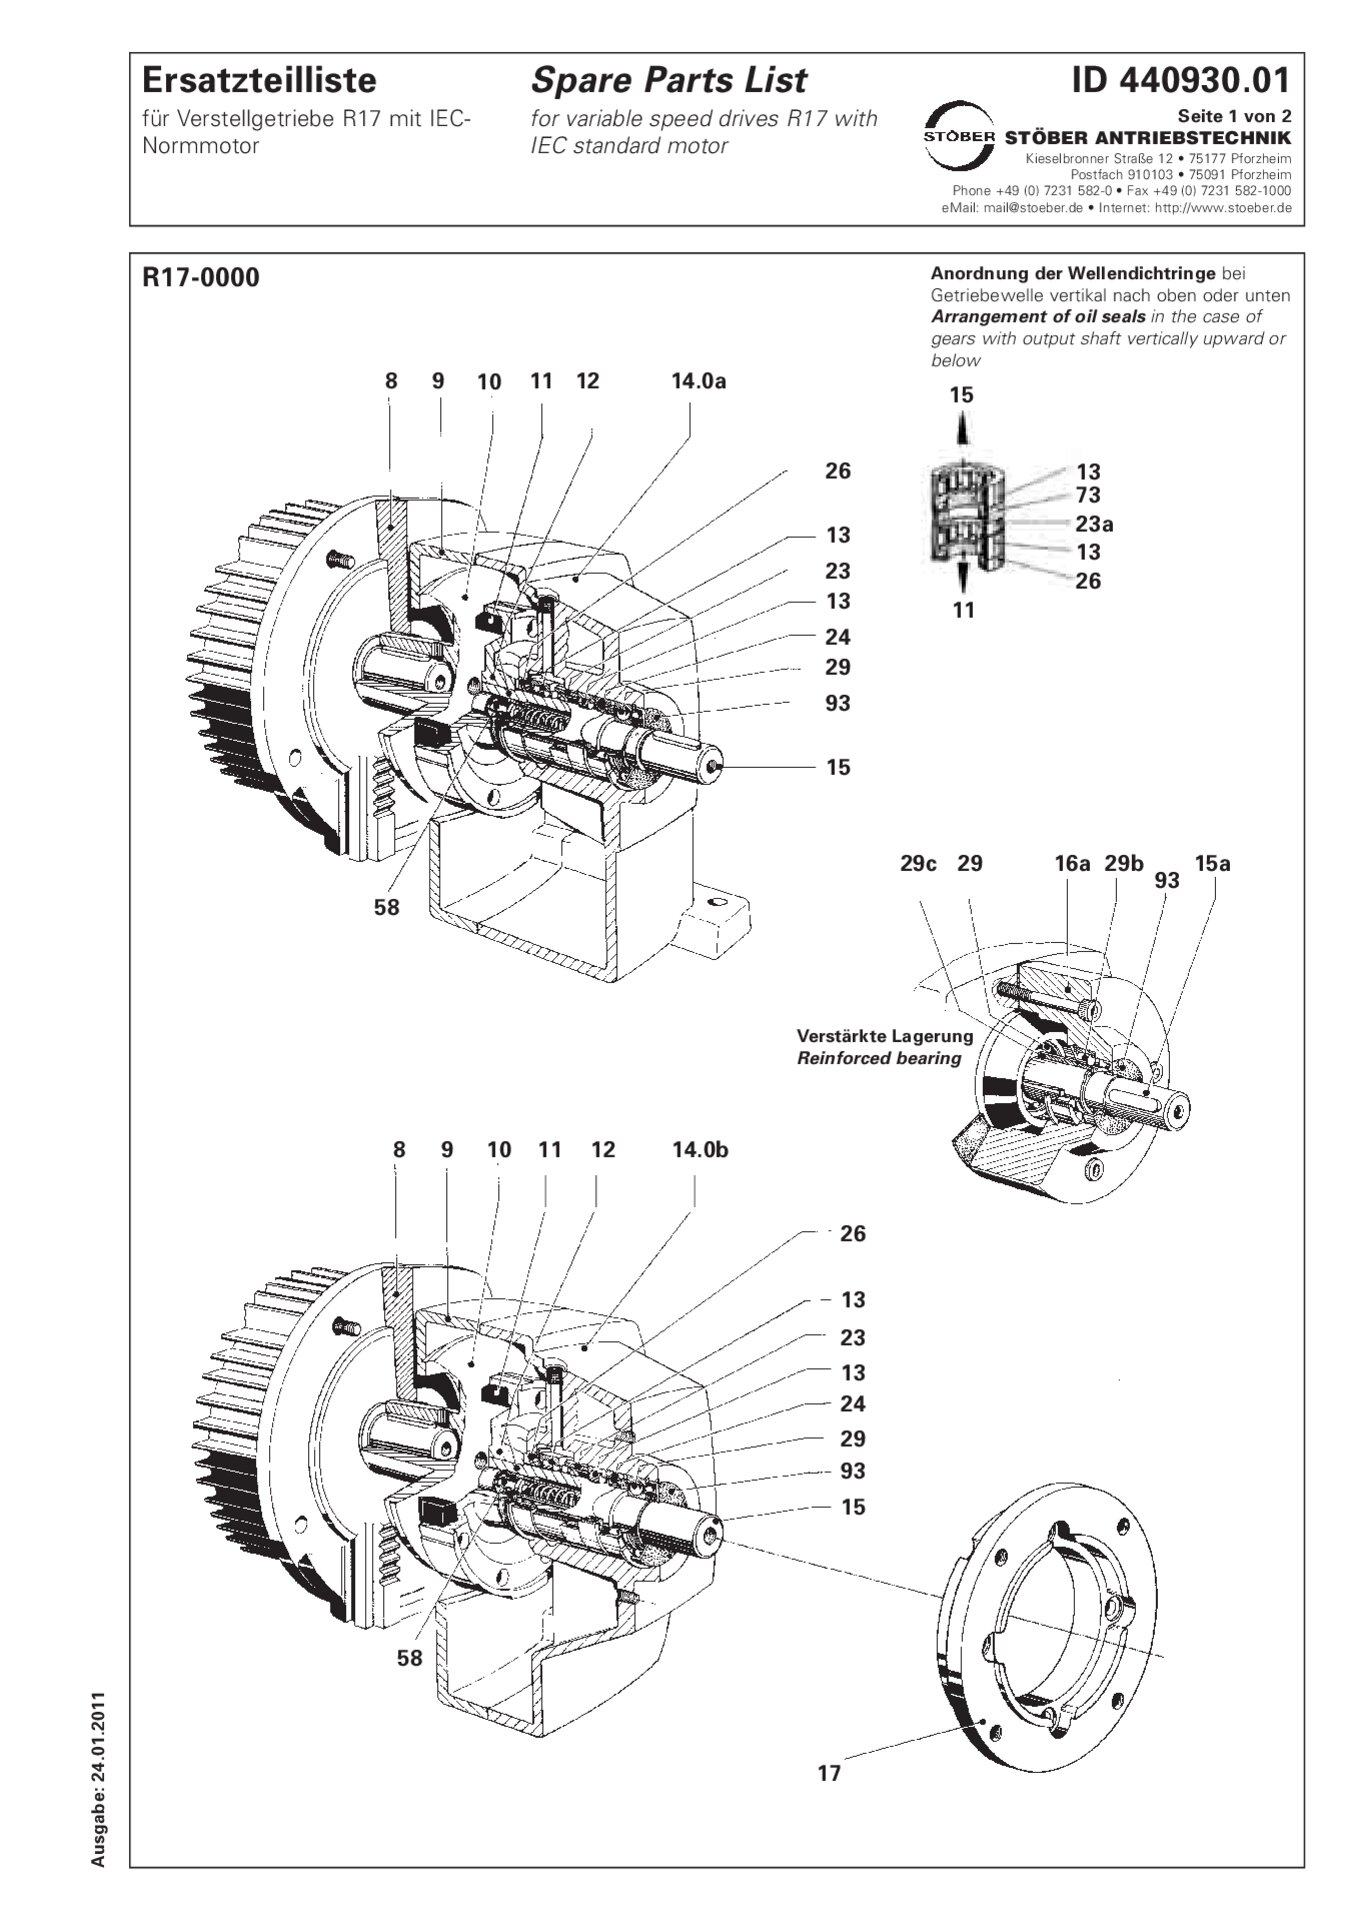 Spare parts list R17-0 with IEC standard motor